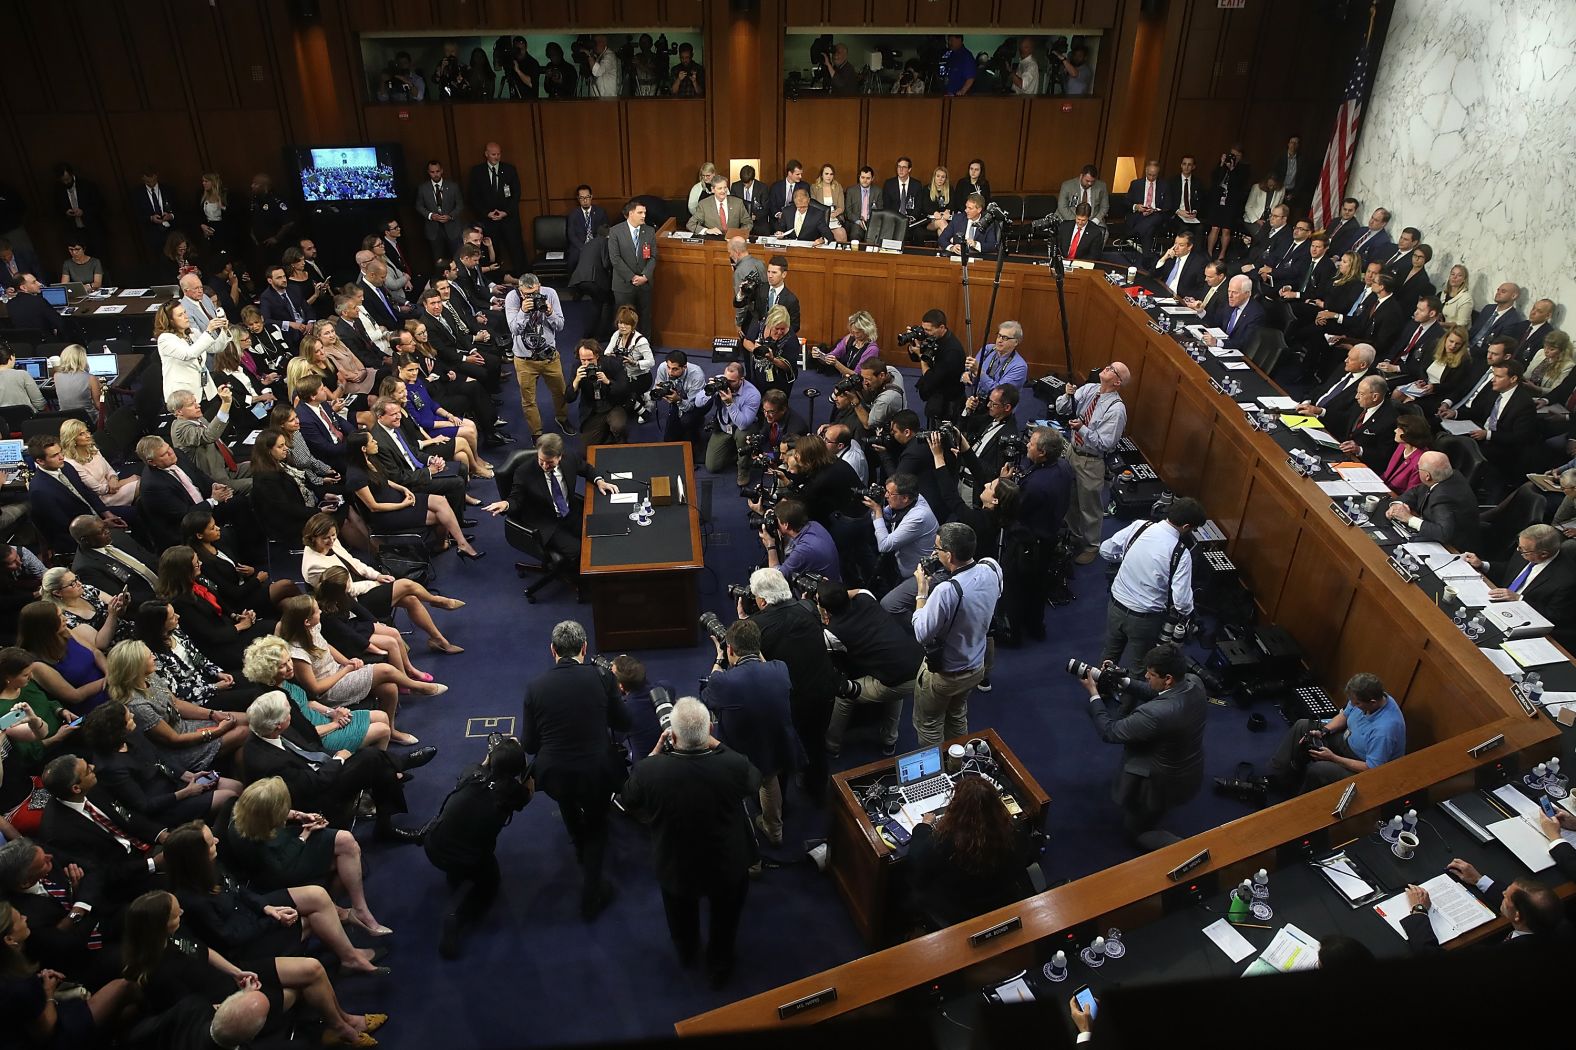 Kavanaugh acknowledges his family in the front row Tuesday.